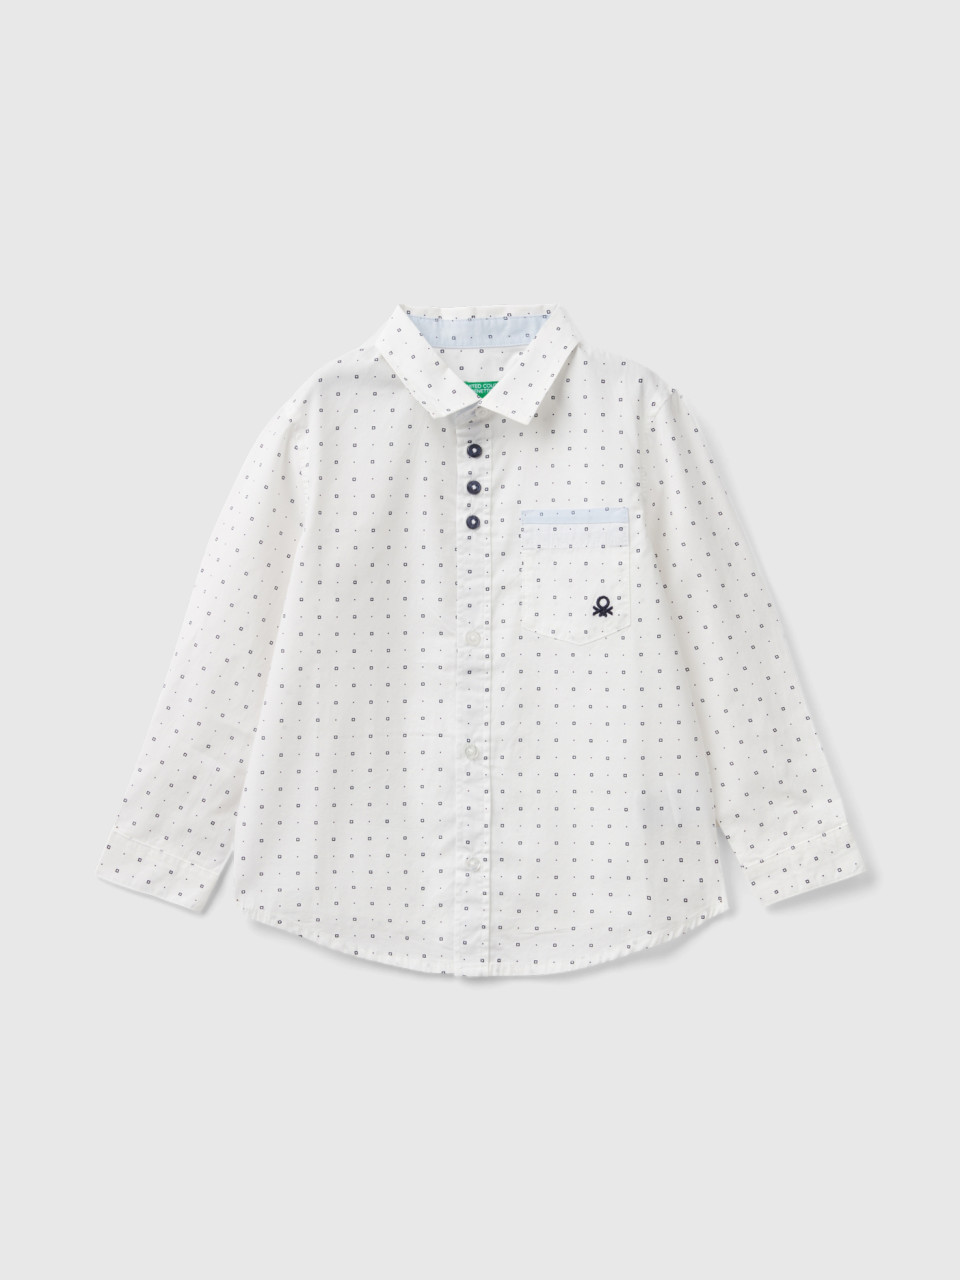 Benetton, Micro Patterned Shirt With Pocket, White, Kids